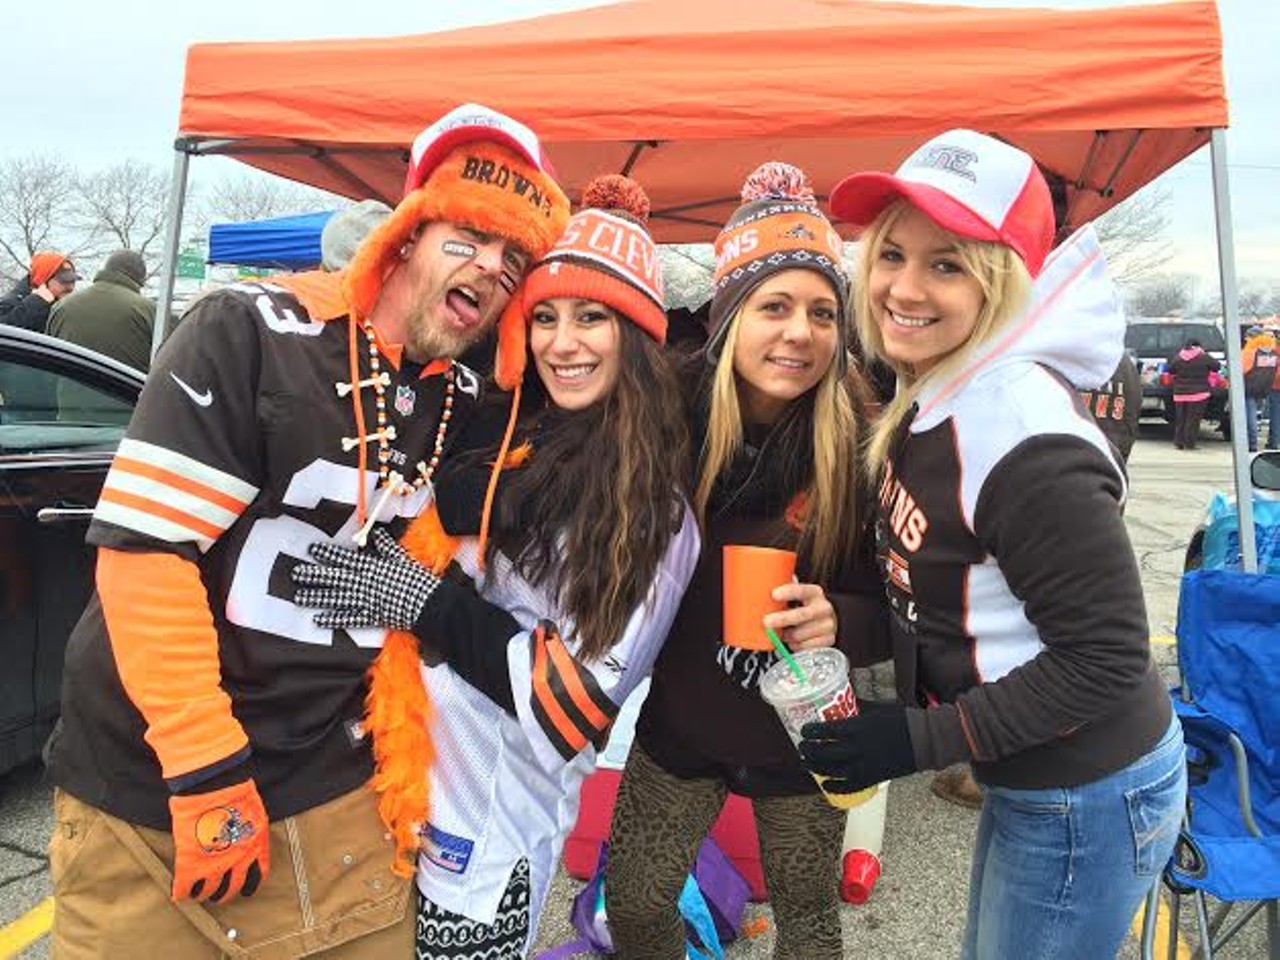 22 Photos of the Scene Events Team at the Browns vs. Texans Muni Lot Tailgate